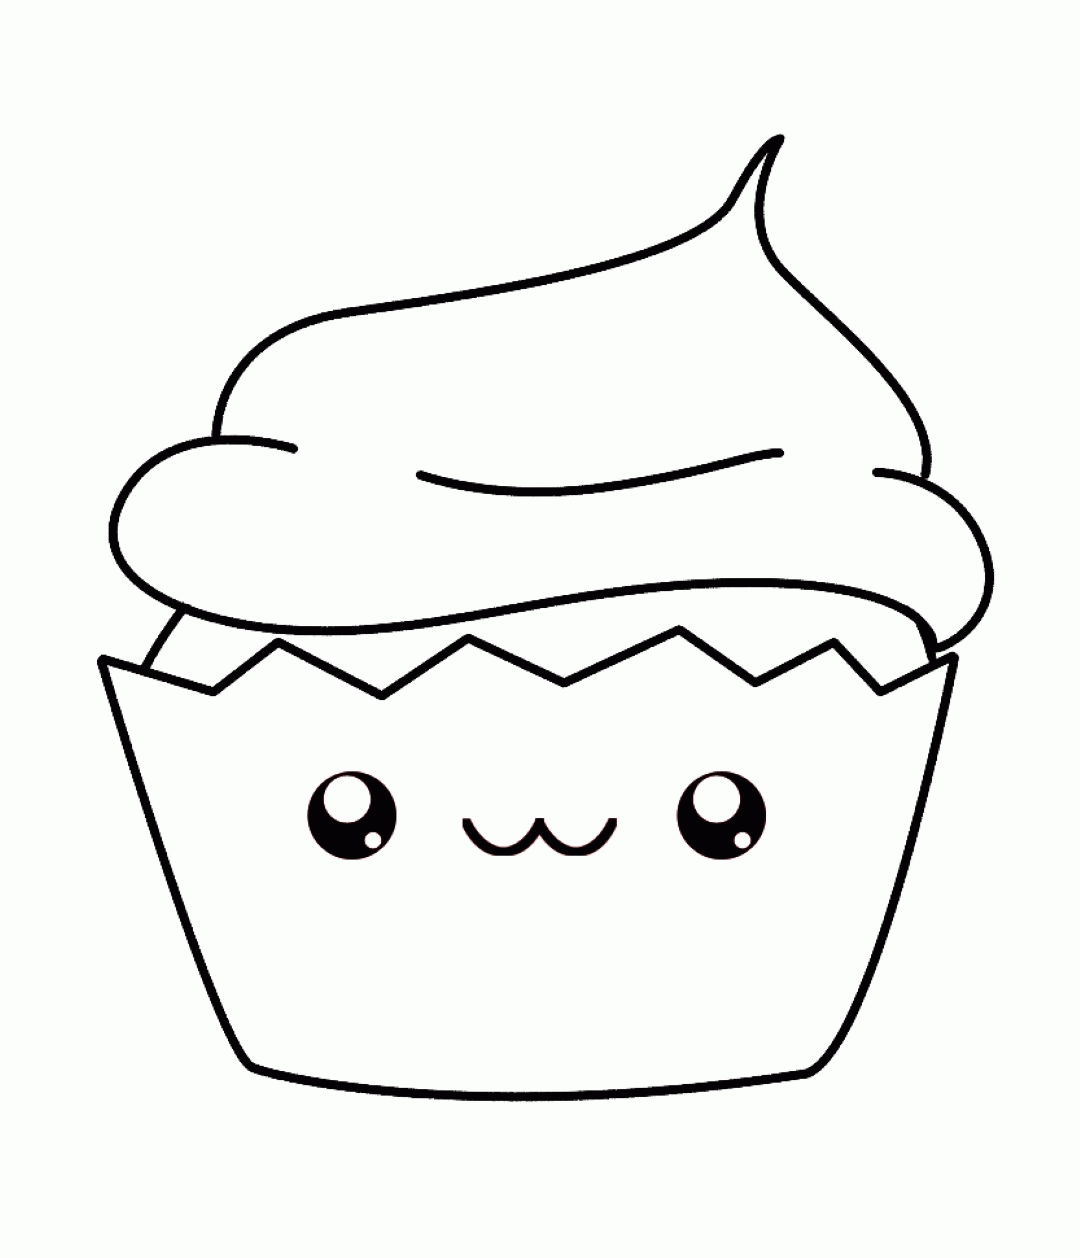 Kawaii Coloring Pages To Download And Print For Free   Coloring Home